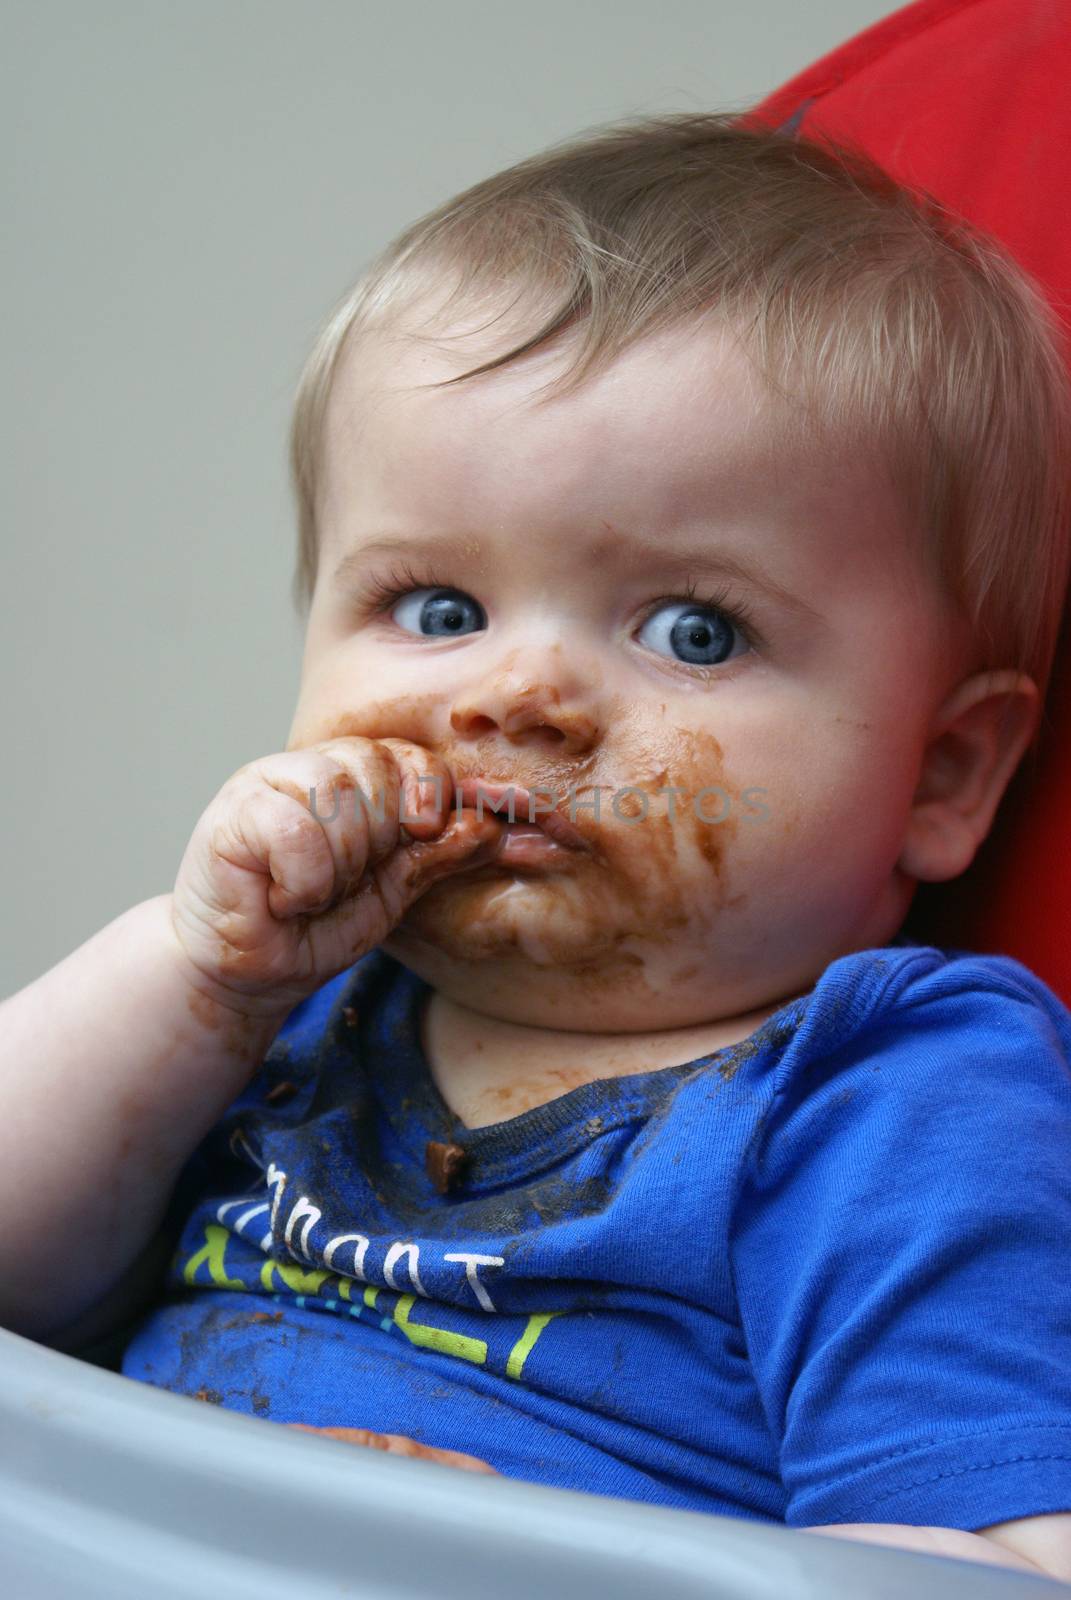 A baby boy experiences his first piece of chocolate.